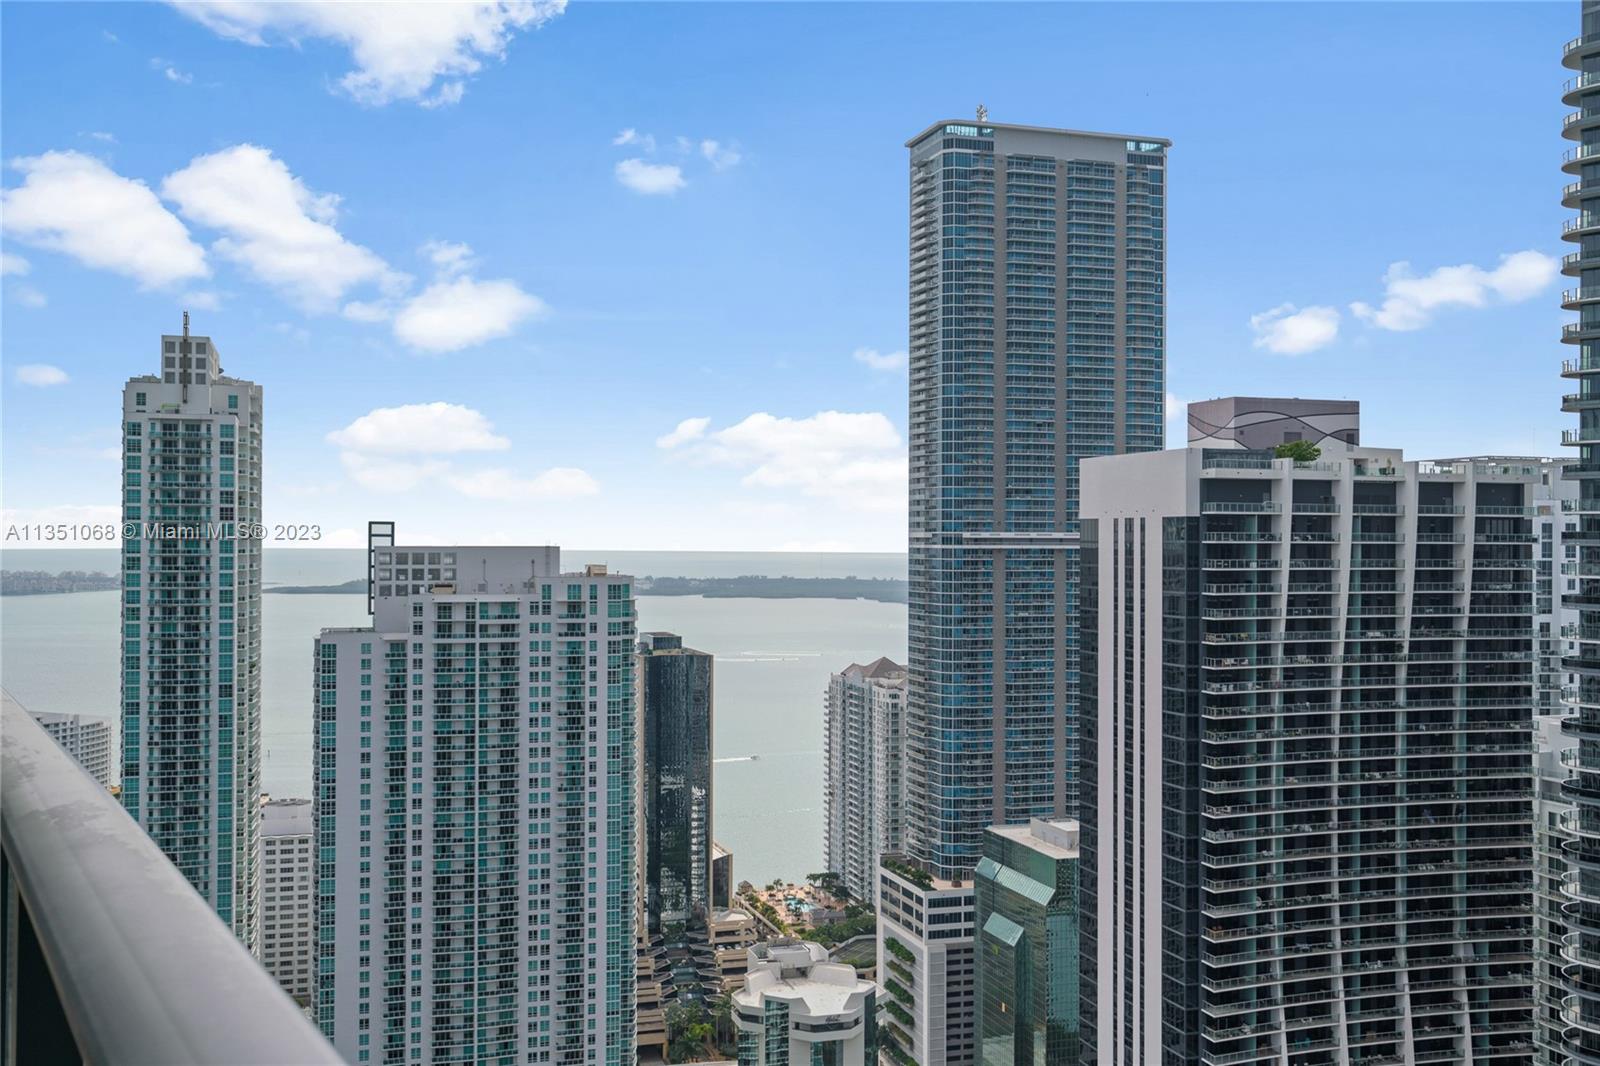 This Lower Penthouse at Brickell Heights East Tower is an exquisite residence, featuring 3 bedrooms and a convertible den, 4 full bathrooms, and breathtaking views of Biscayne Bay and the Miami skyline. The floor-to-ceiling windows allow for abundant natural light and showcase the expansive balcony. The residence also includes 32 x 32 porcelain tile, a spacious laundry room, and 3 parking spaces. You'll enjoy the convenience of being within walking distance to Brickell City Center and a variety of top-rated restaurants and shops. Live in luxury and experience the best of Miami's city lifestyle. UNIT COMES WITH 2 ASSIGNED PARKING SPOTS AND 1 VALET.